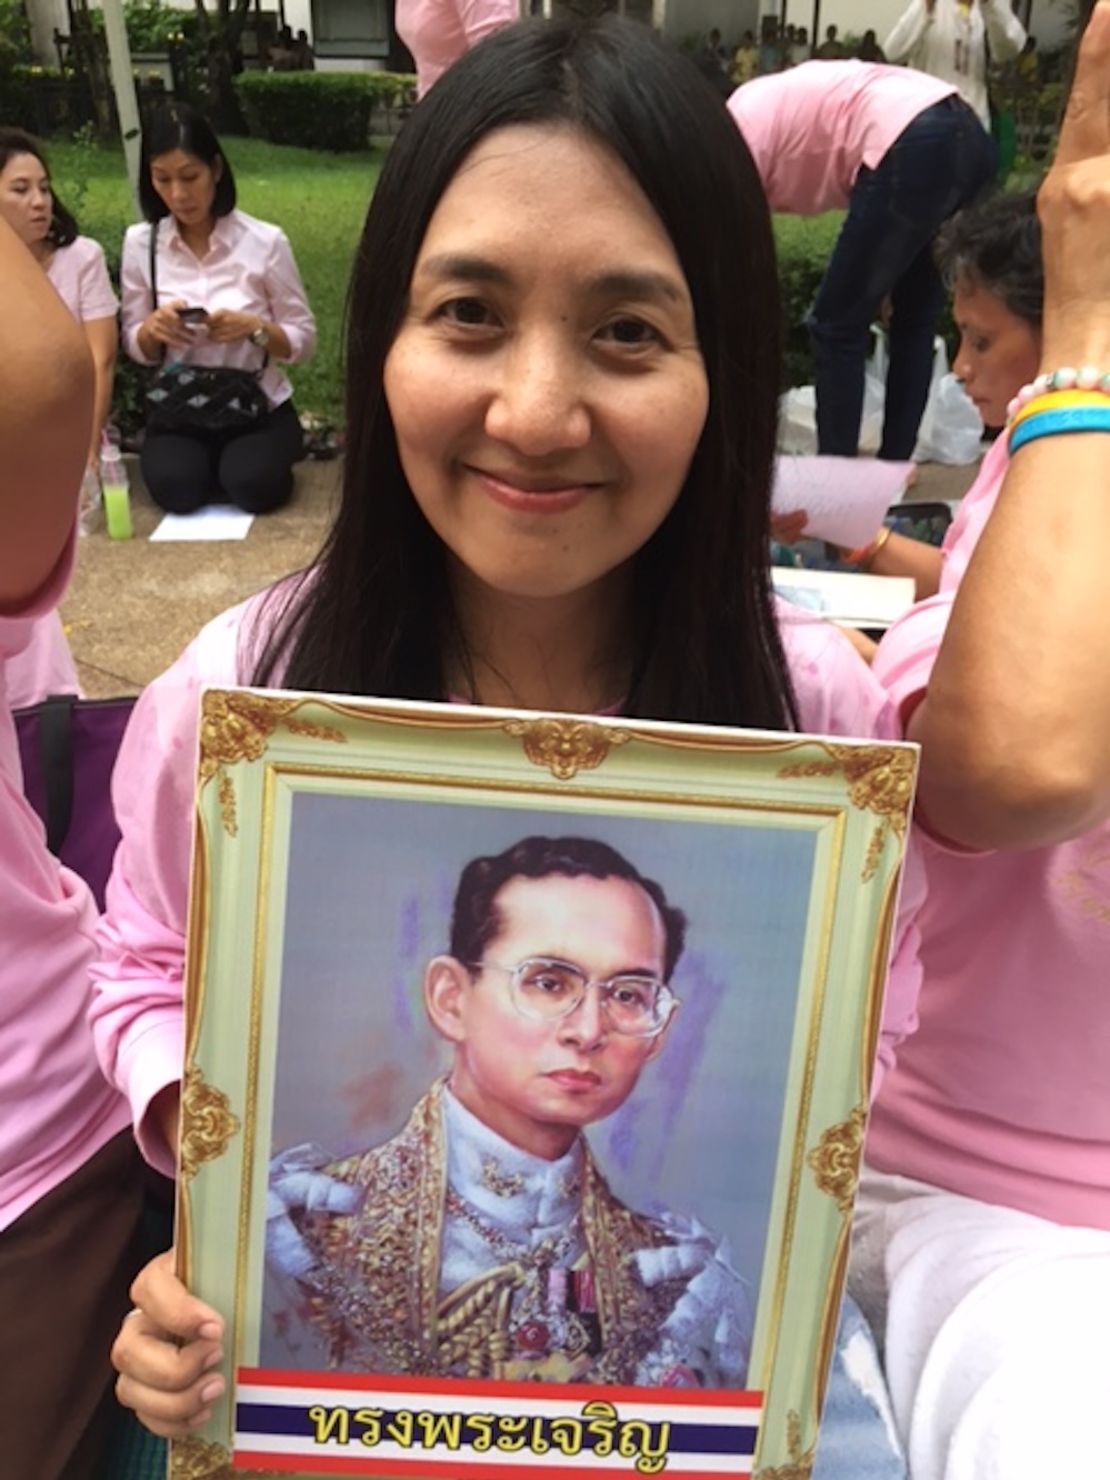 Donnapha Kladbupha holds a picture of a young King Bhumibol.